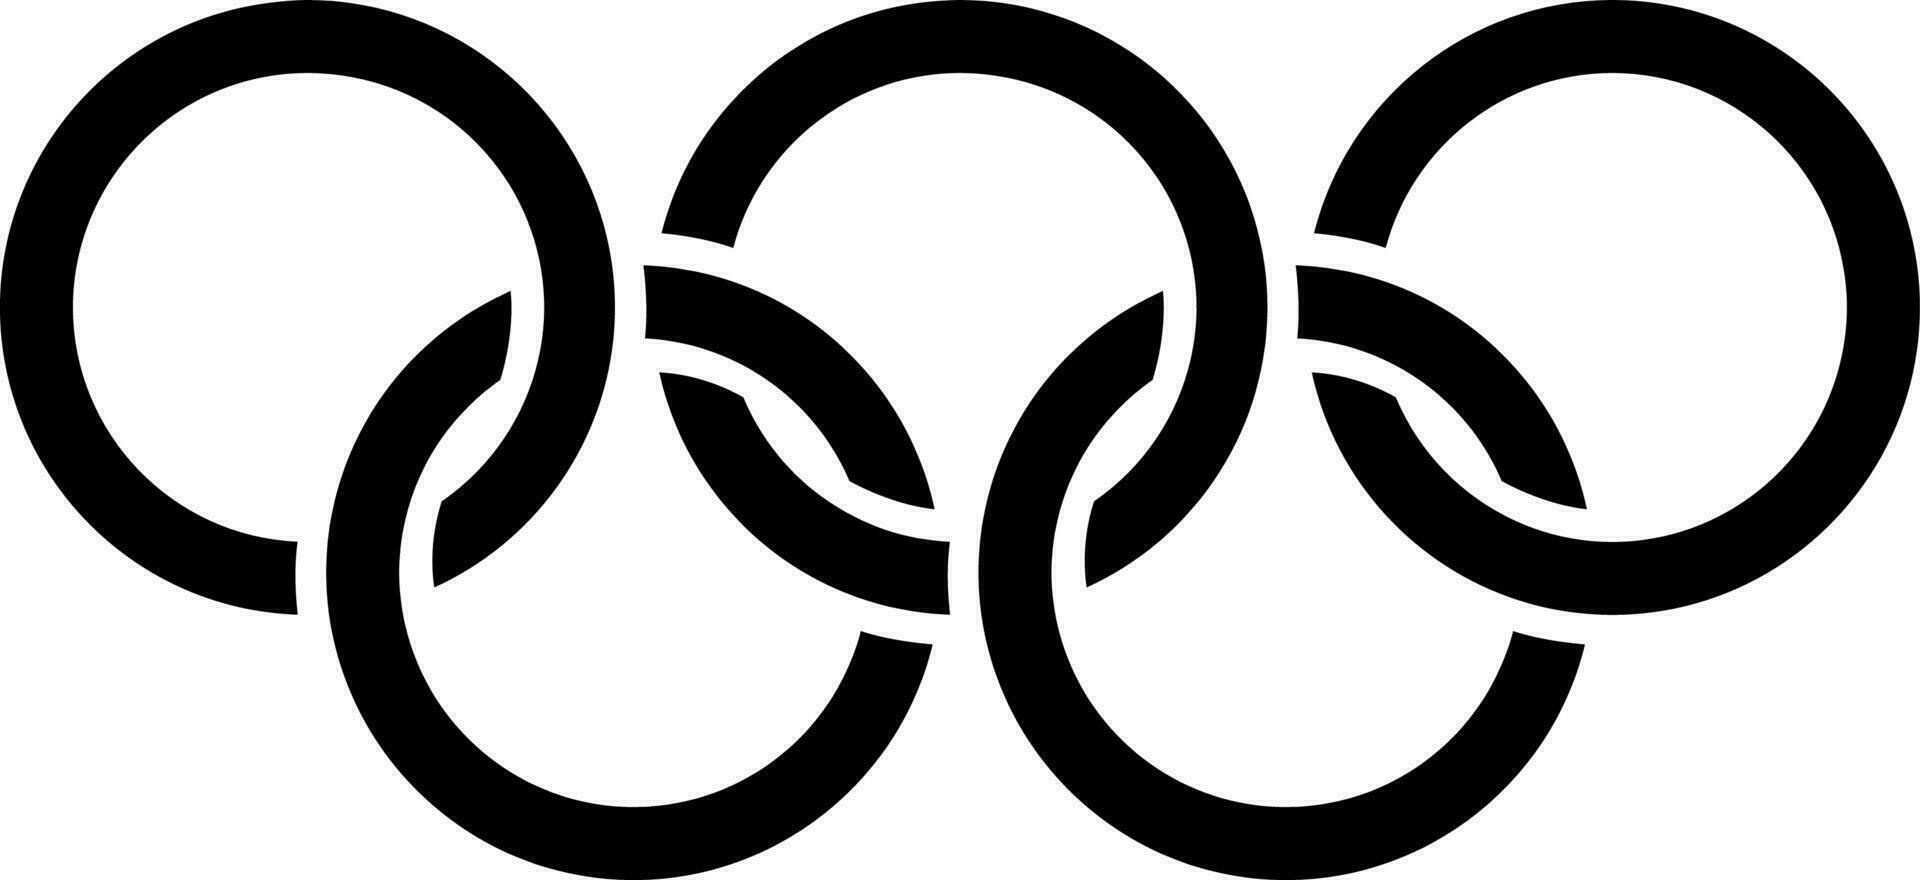 Olympic games icon in glyph style. vector